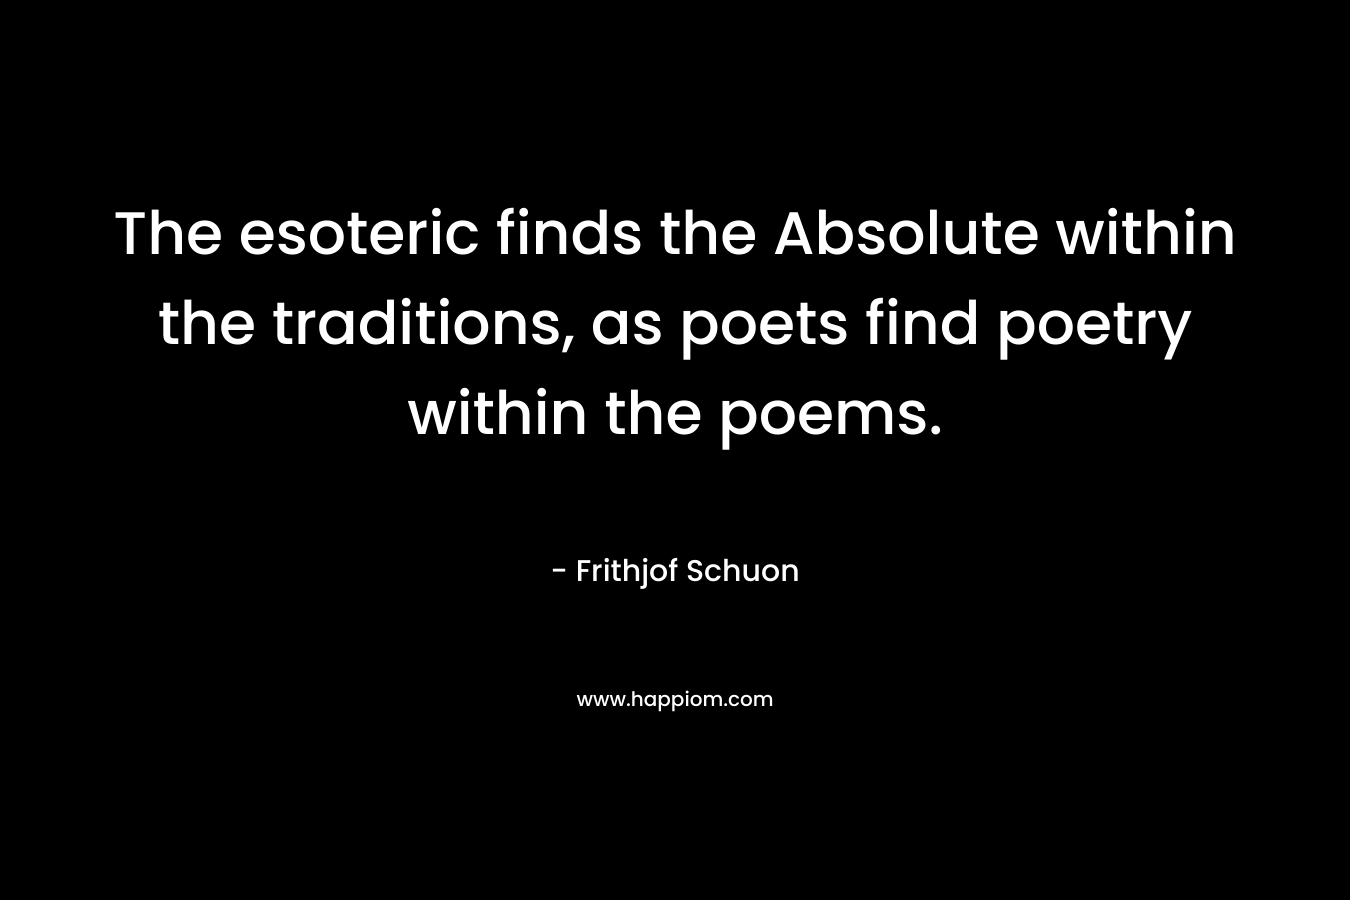 The esoteric finds the Absolute within the traditions, as poets find poetry within the poems. – Frithjof Schuon